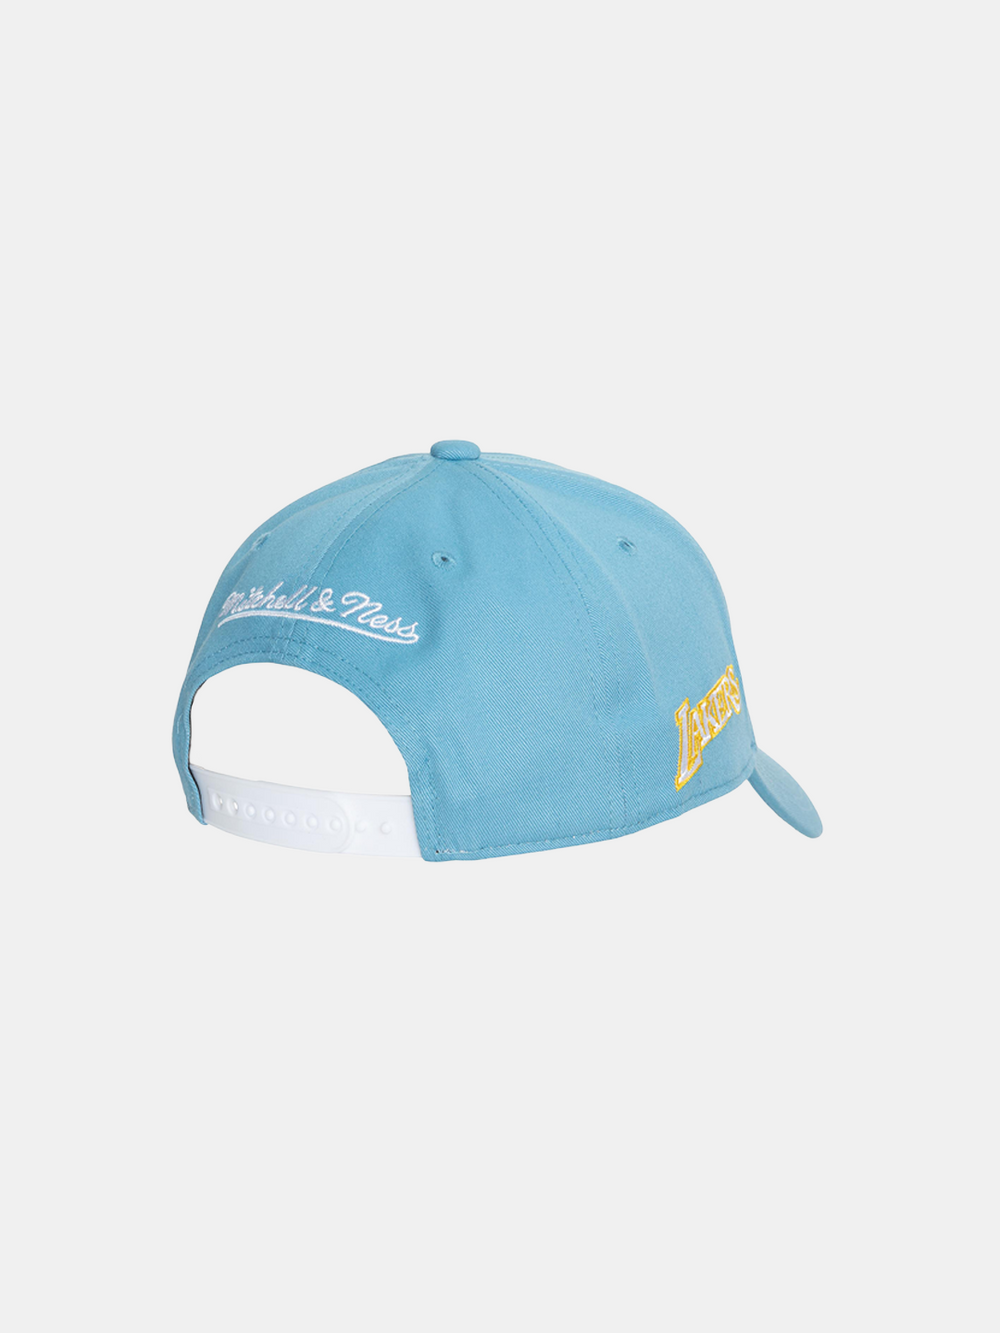 UNINTERRUPTED X Mitchell & Ness Legends Hat Lakers - Back